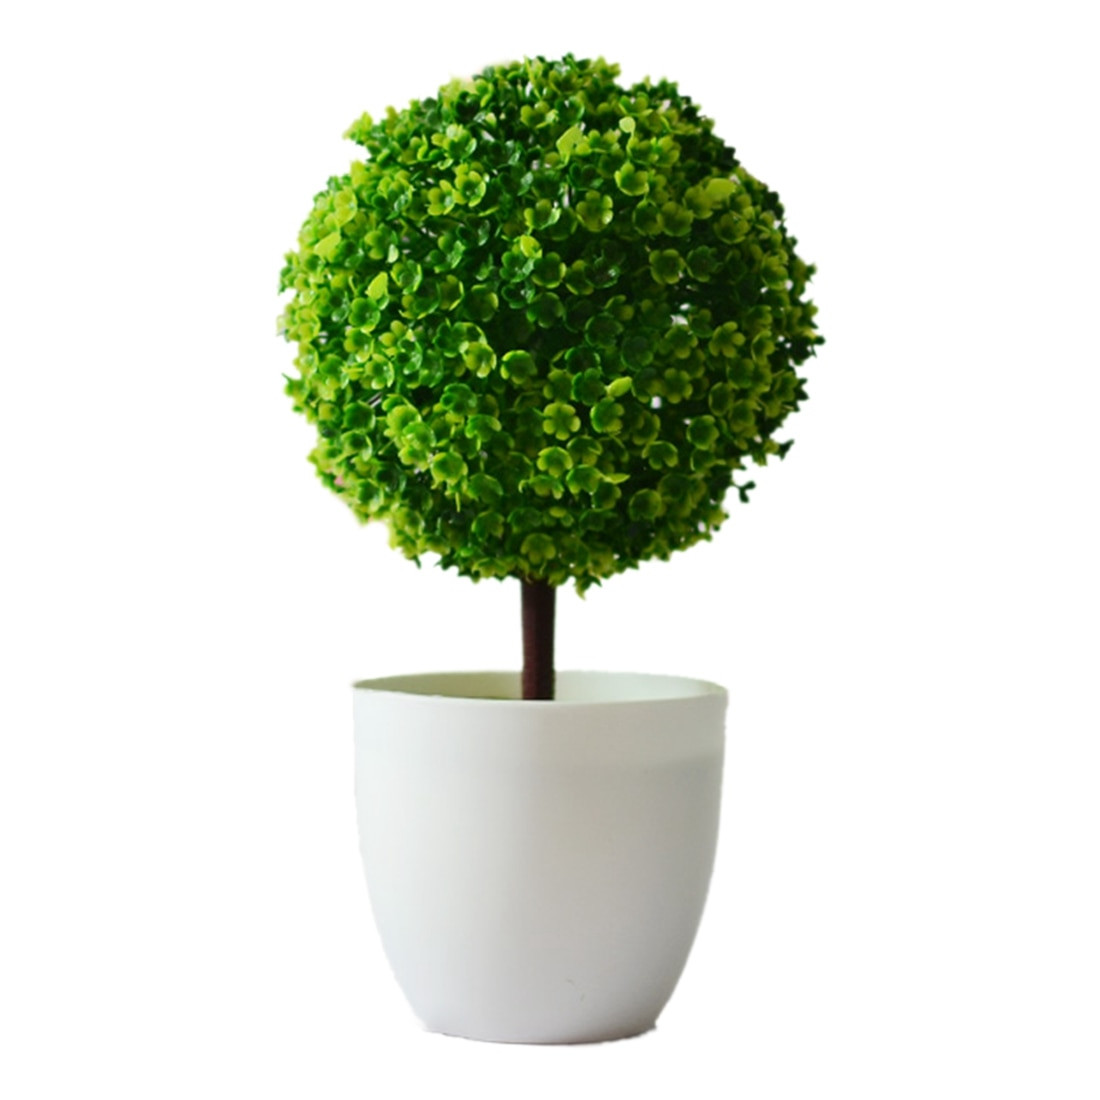 30 attractive House Plant Vase 2024 free download house plant vase of best artificial plants ball bonsai can washes decorative green with artificial plants ball bonsai can washes decorative green plants for home decoration plantsvase